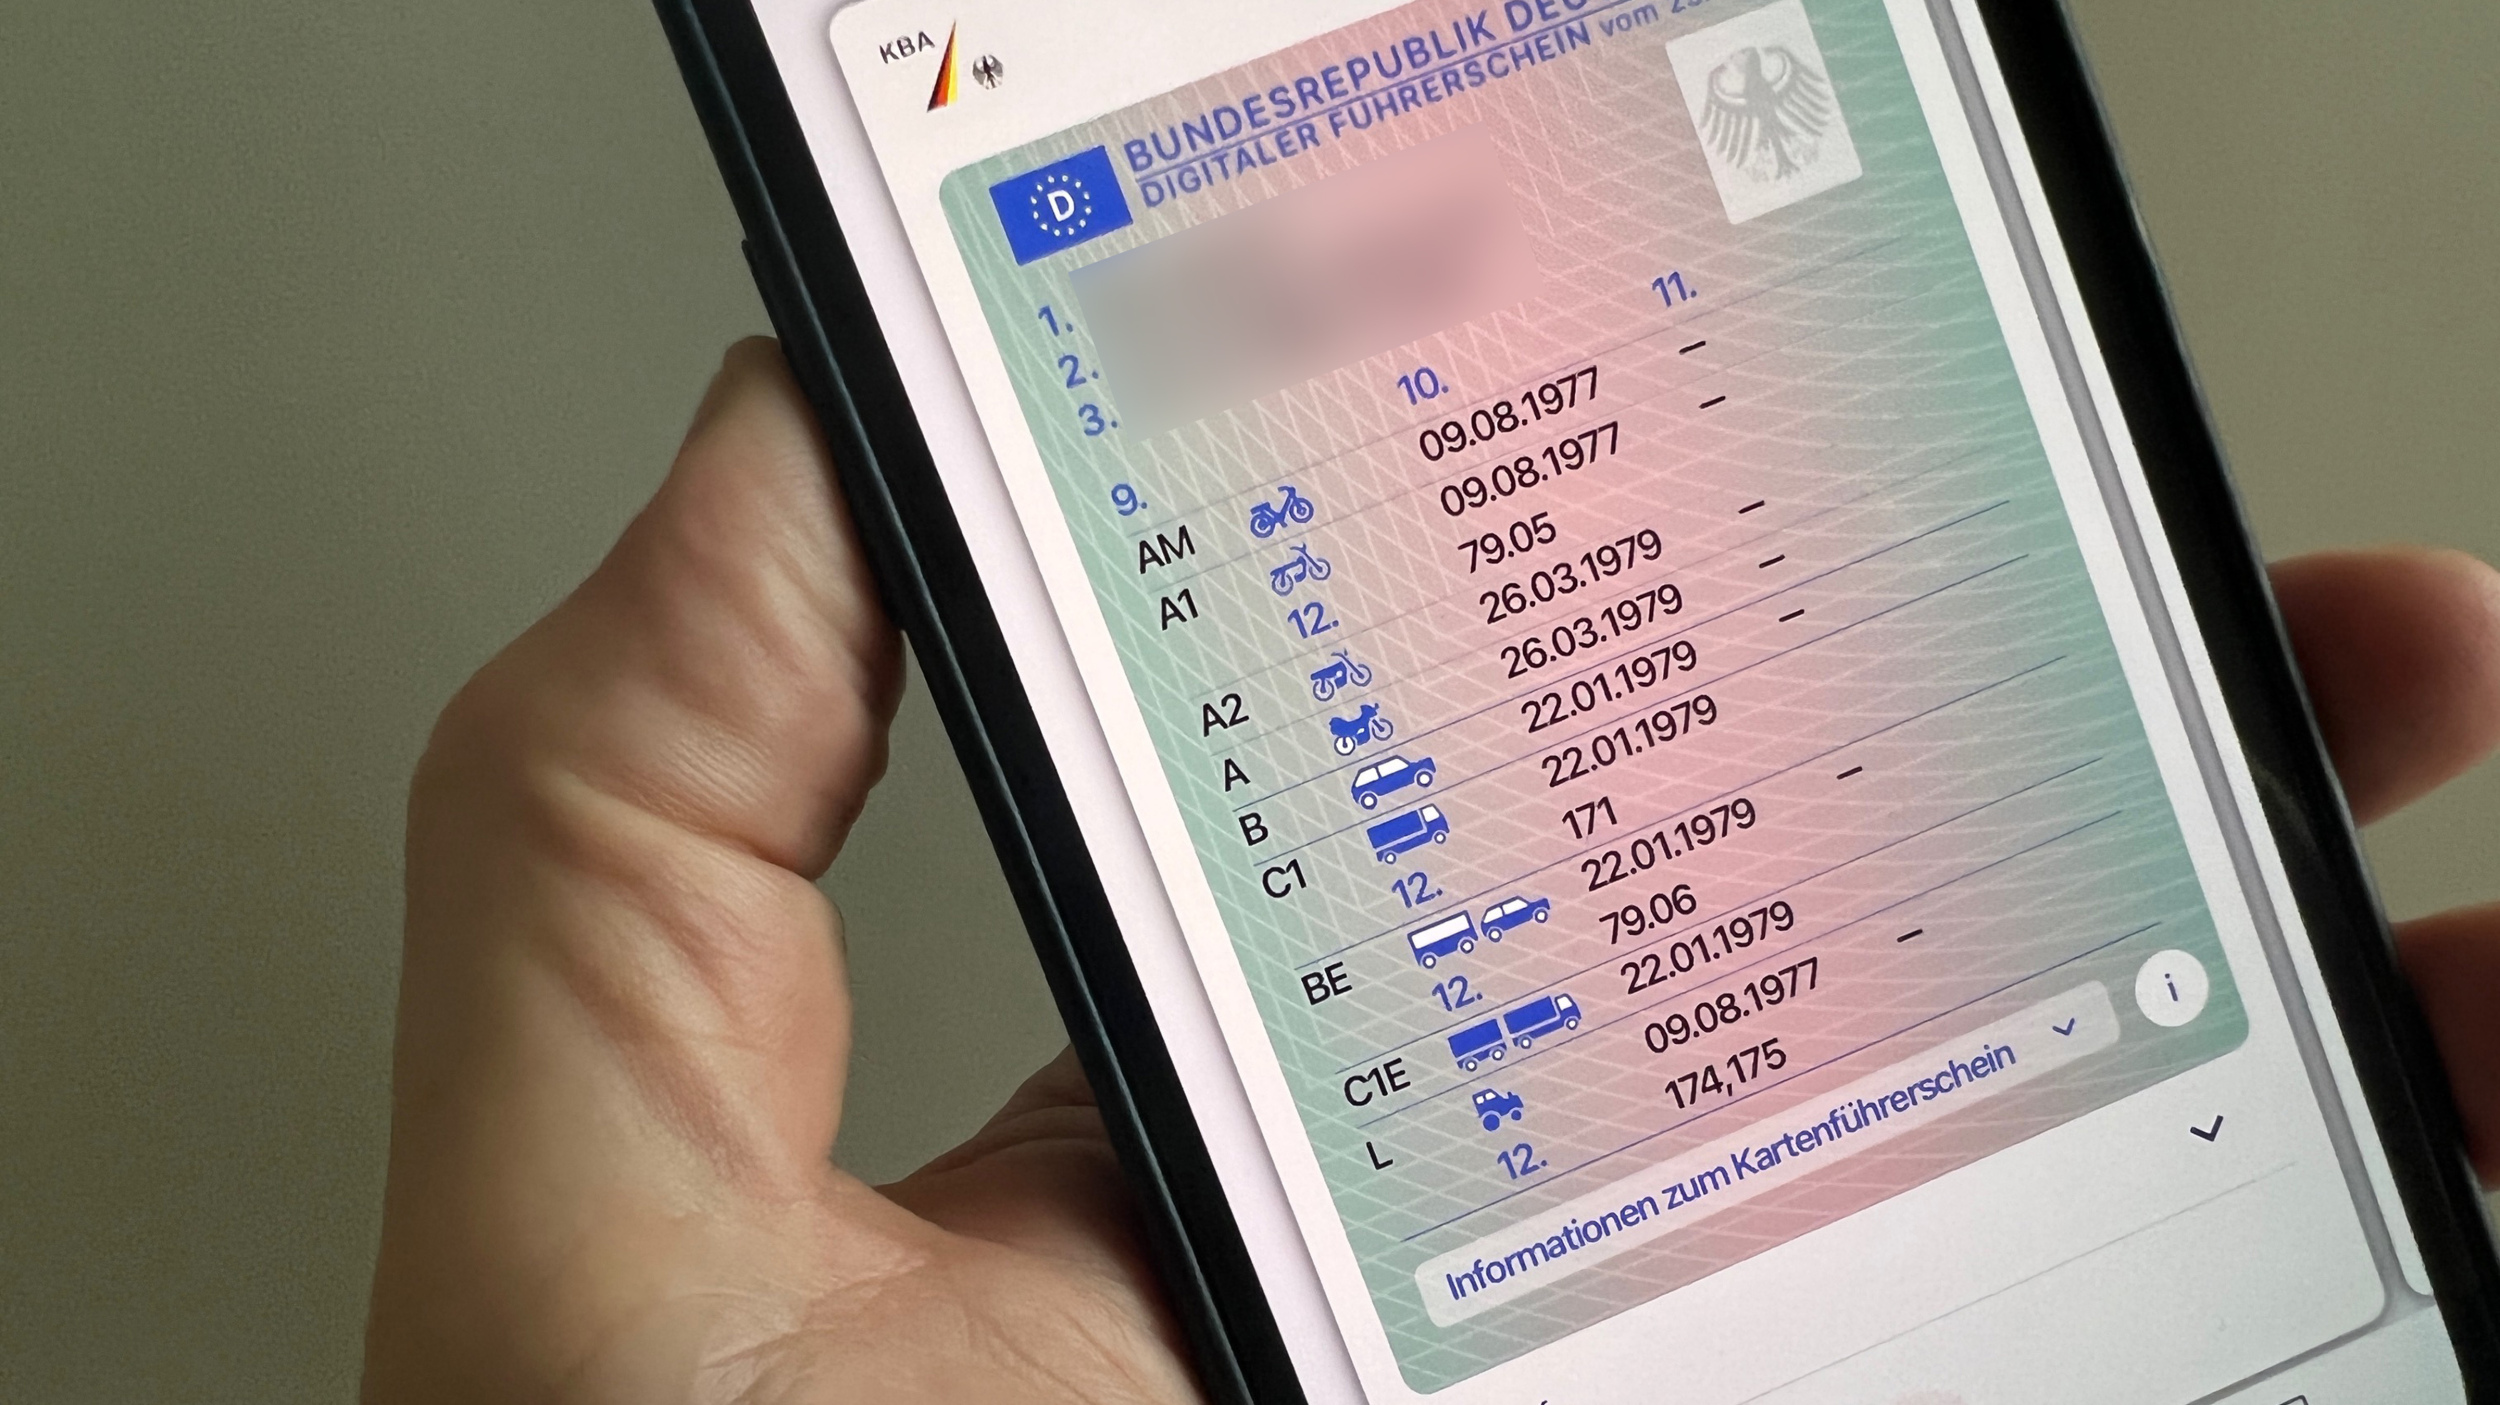 ID wallet app: It's seemingly easy to fake a digital driver's license on a cell phone